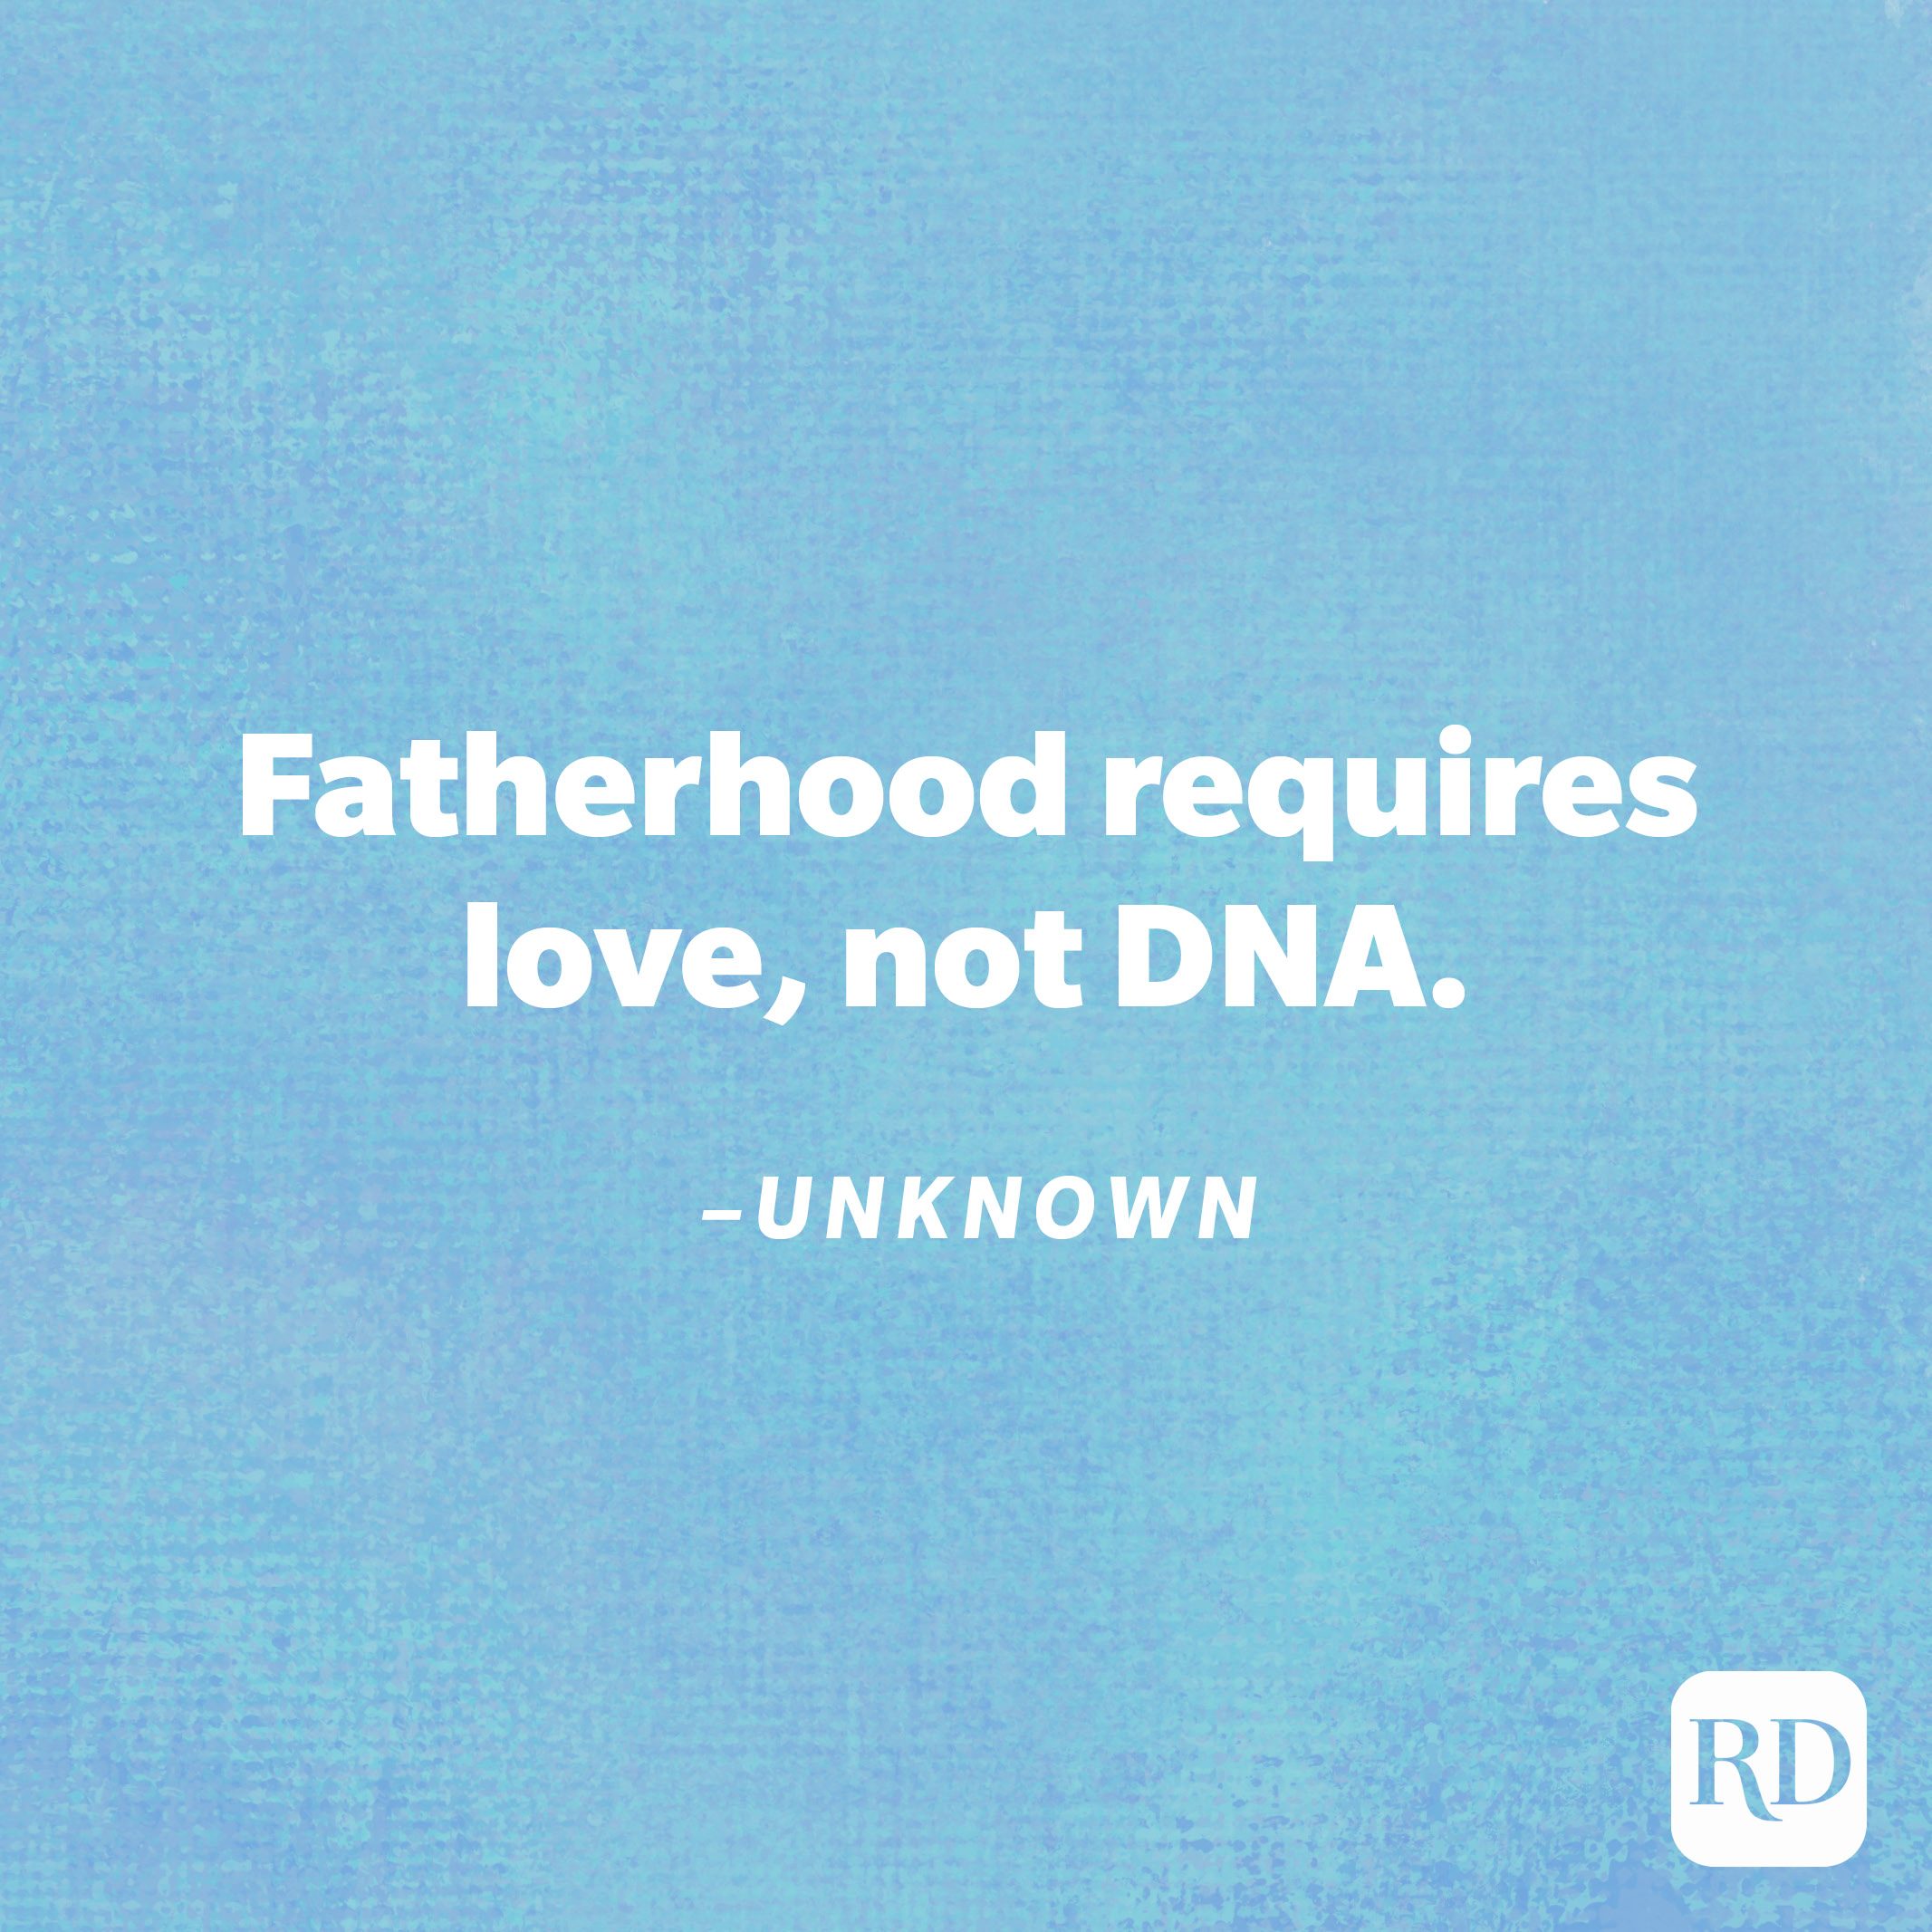 "Fatherhood requires love, not DNA."—Unknown